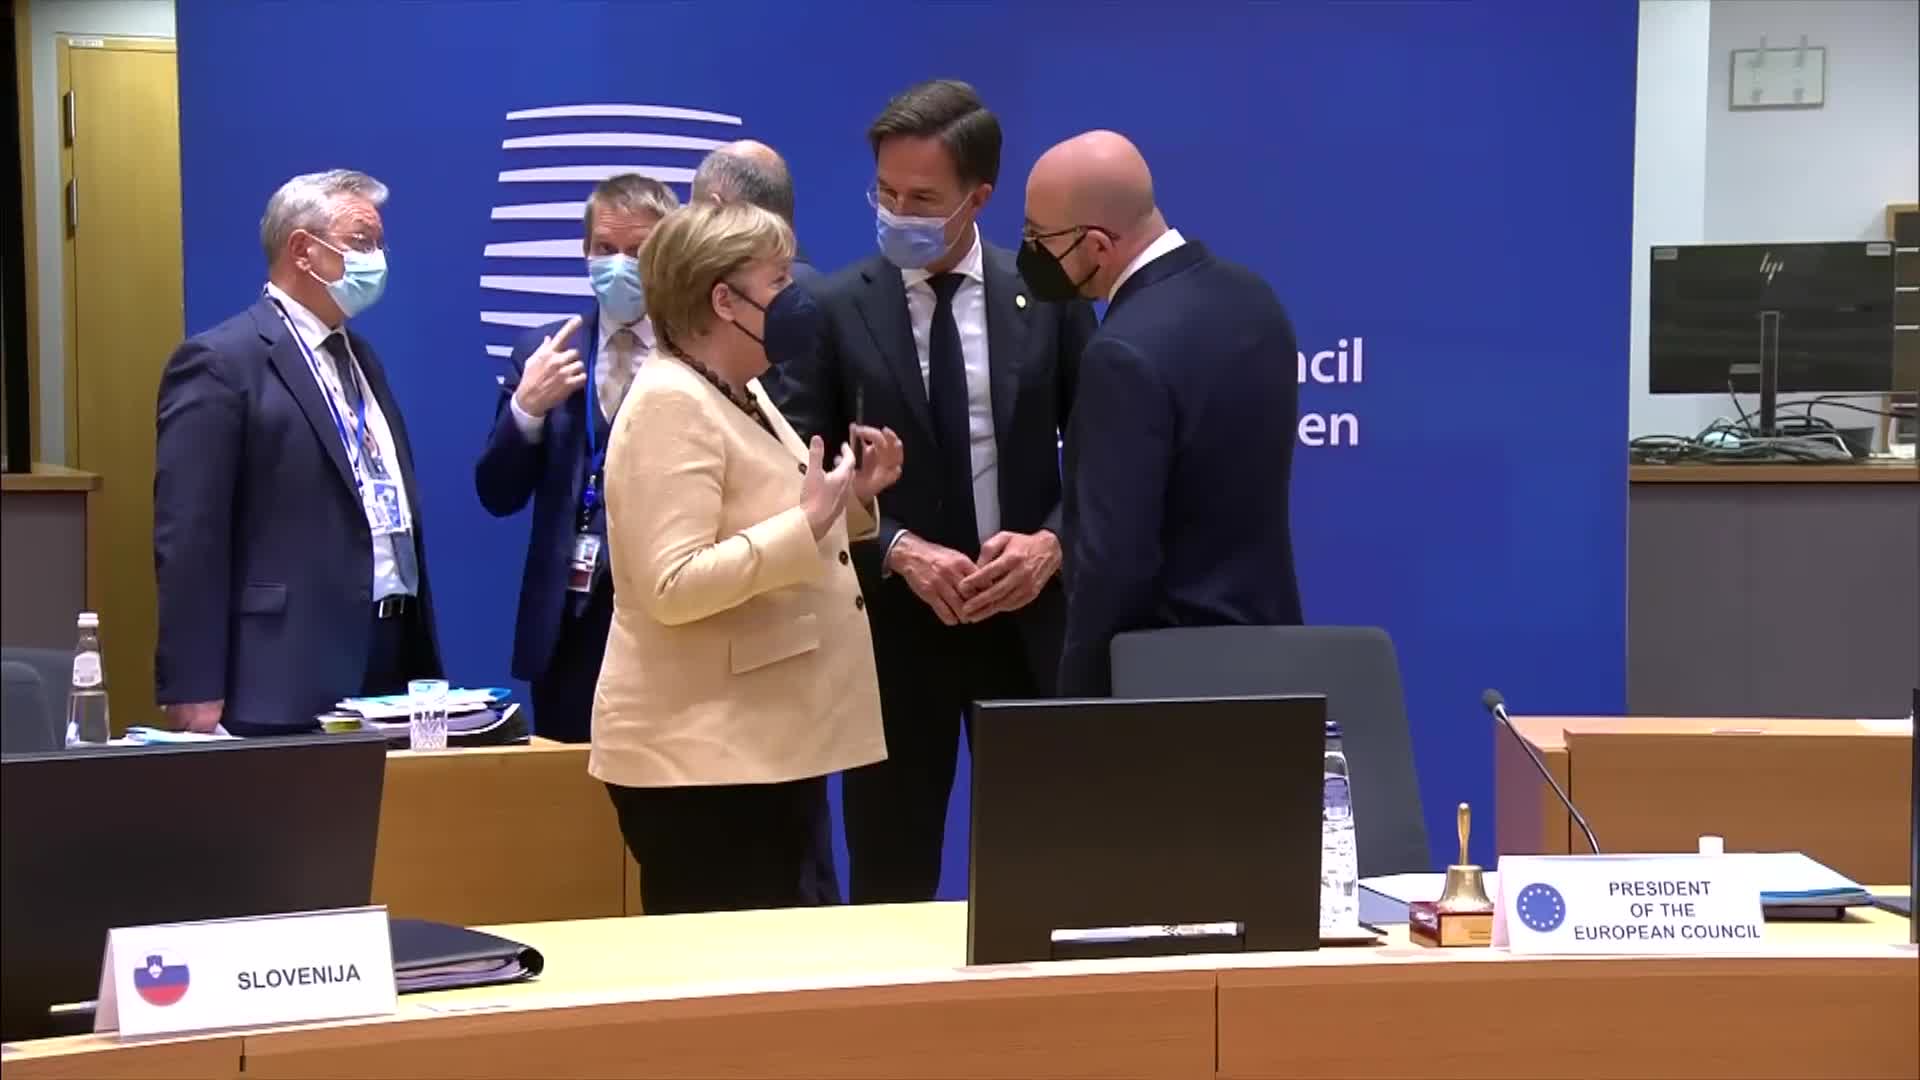 Video: Extracts from the roundtable of the European Council.